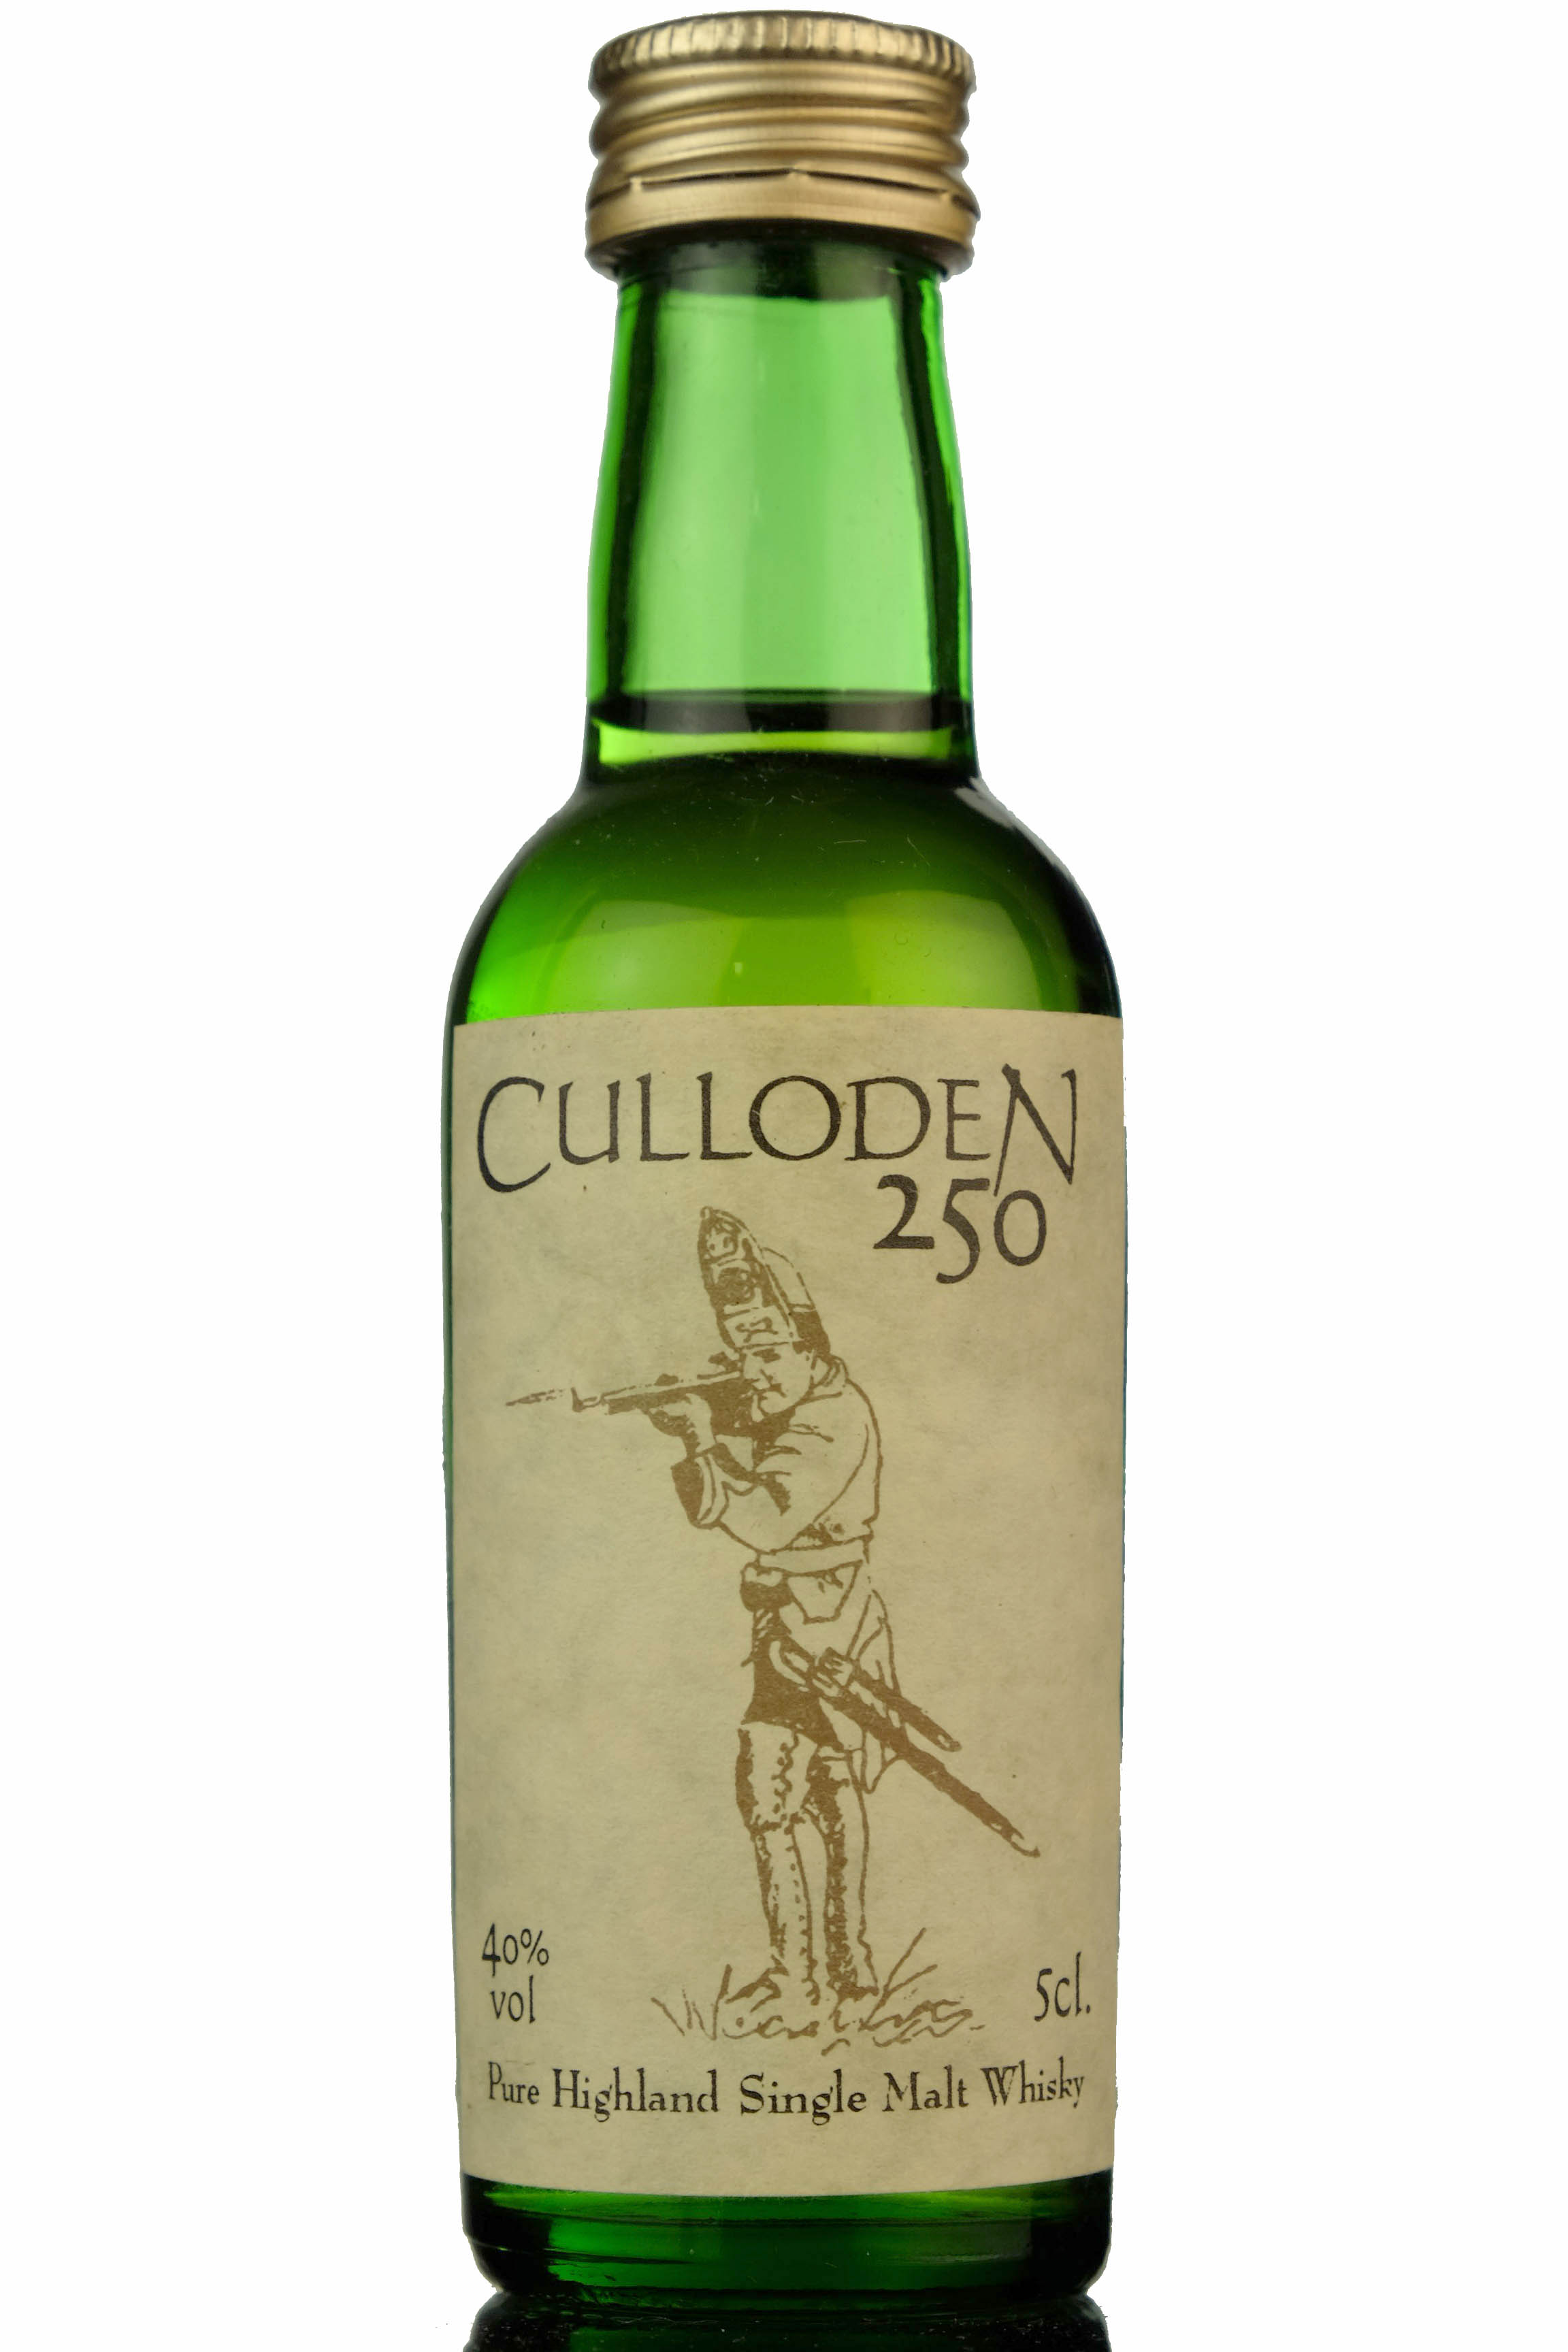 Culloden 250 - The Whisky Connoisseur Miniature